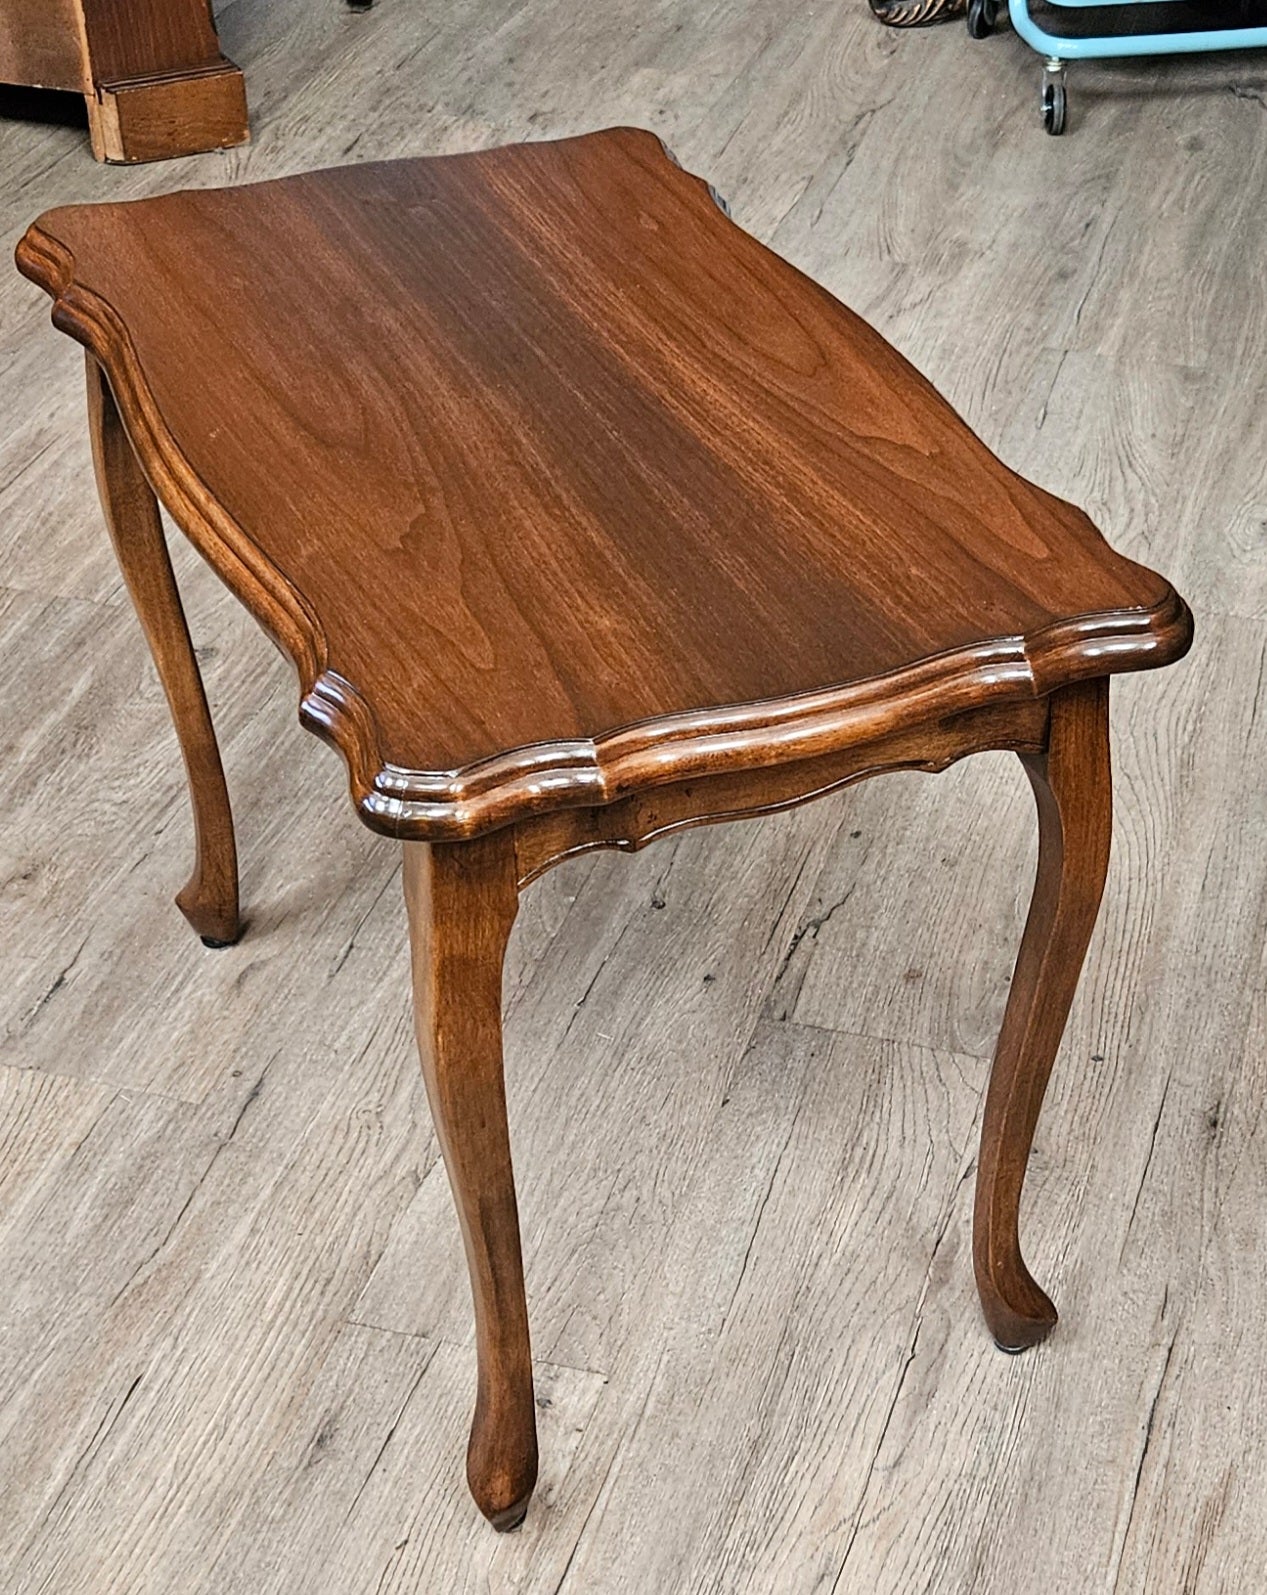 Rectangular coffee/side table, French Provincial style